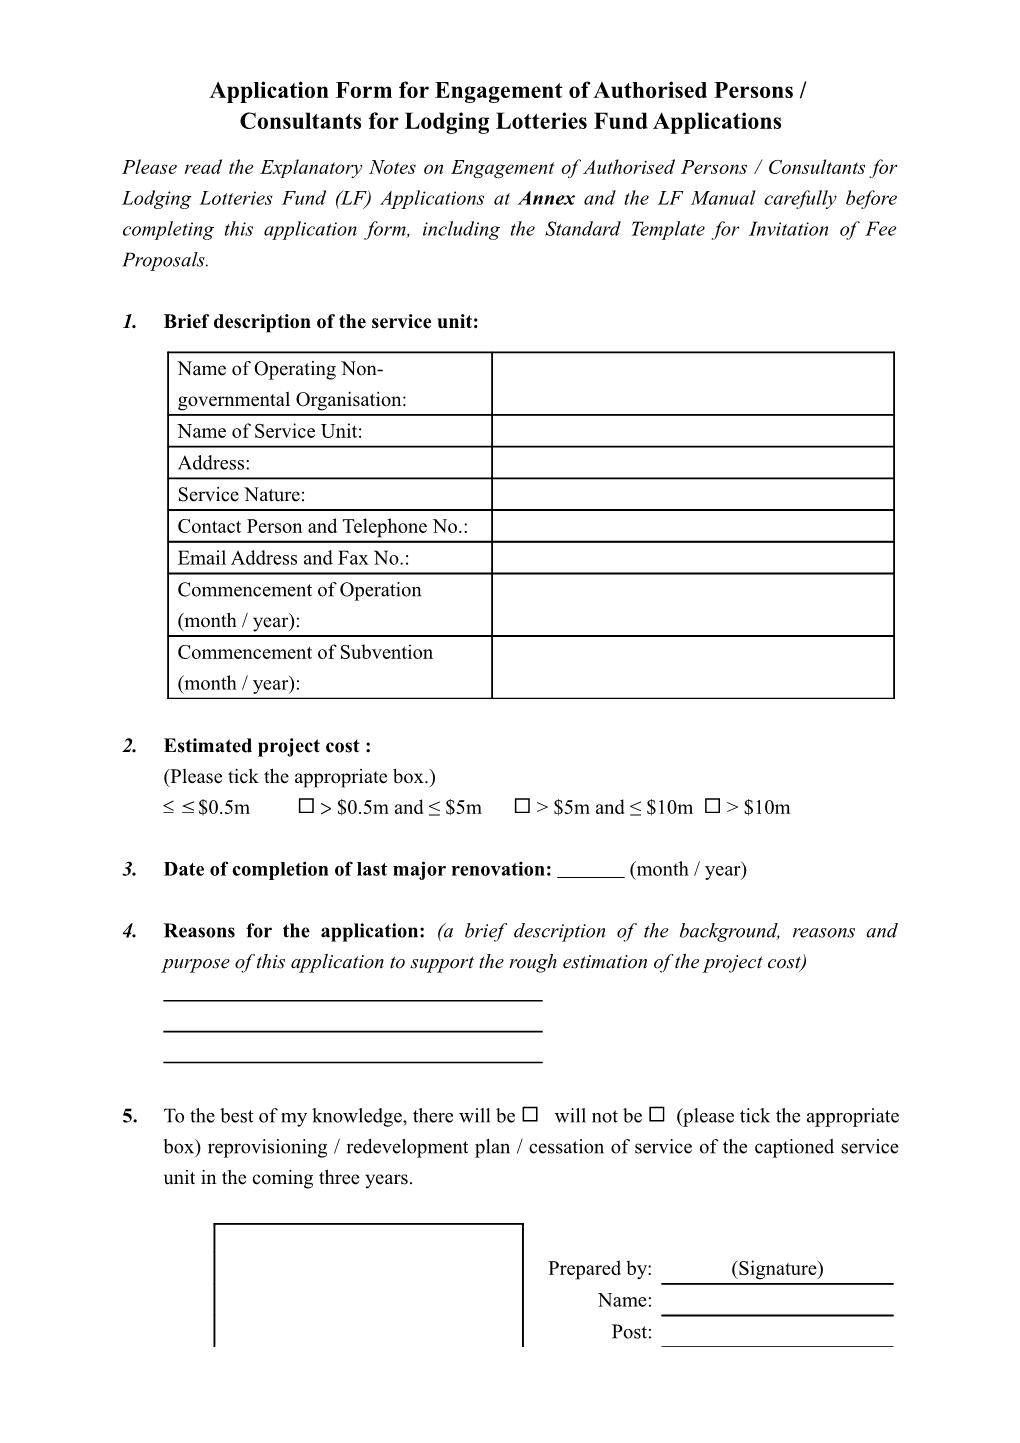 Application for Engagement of Authorised Persons For